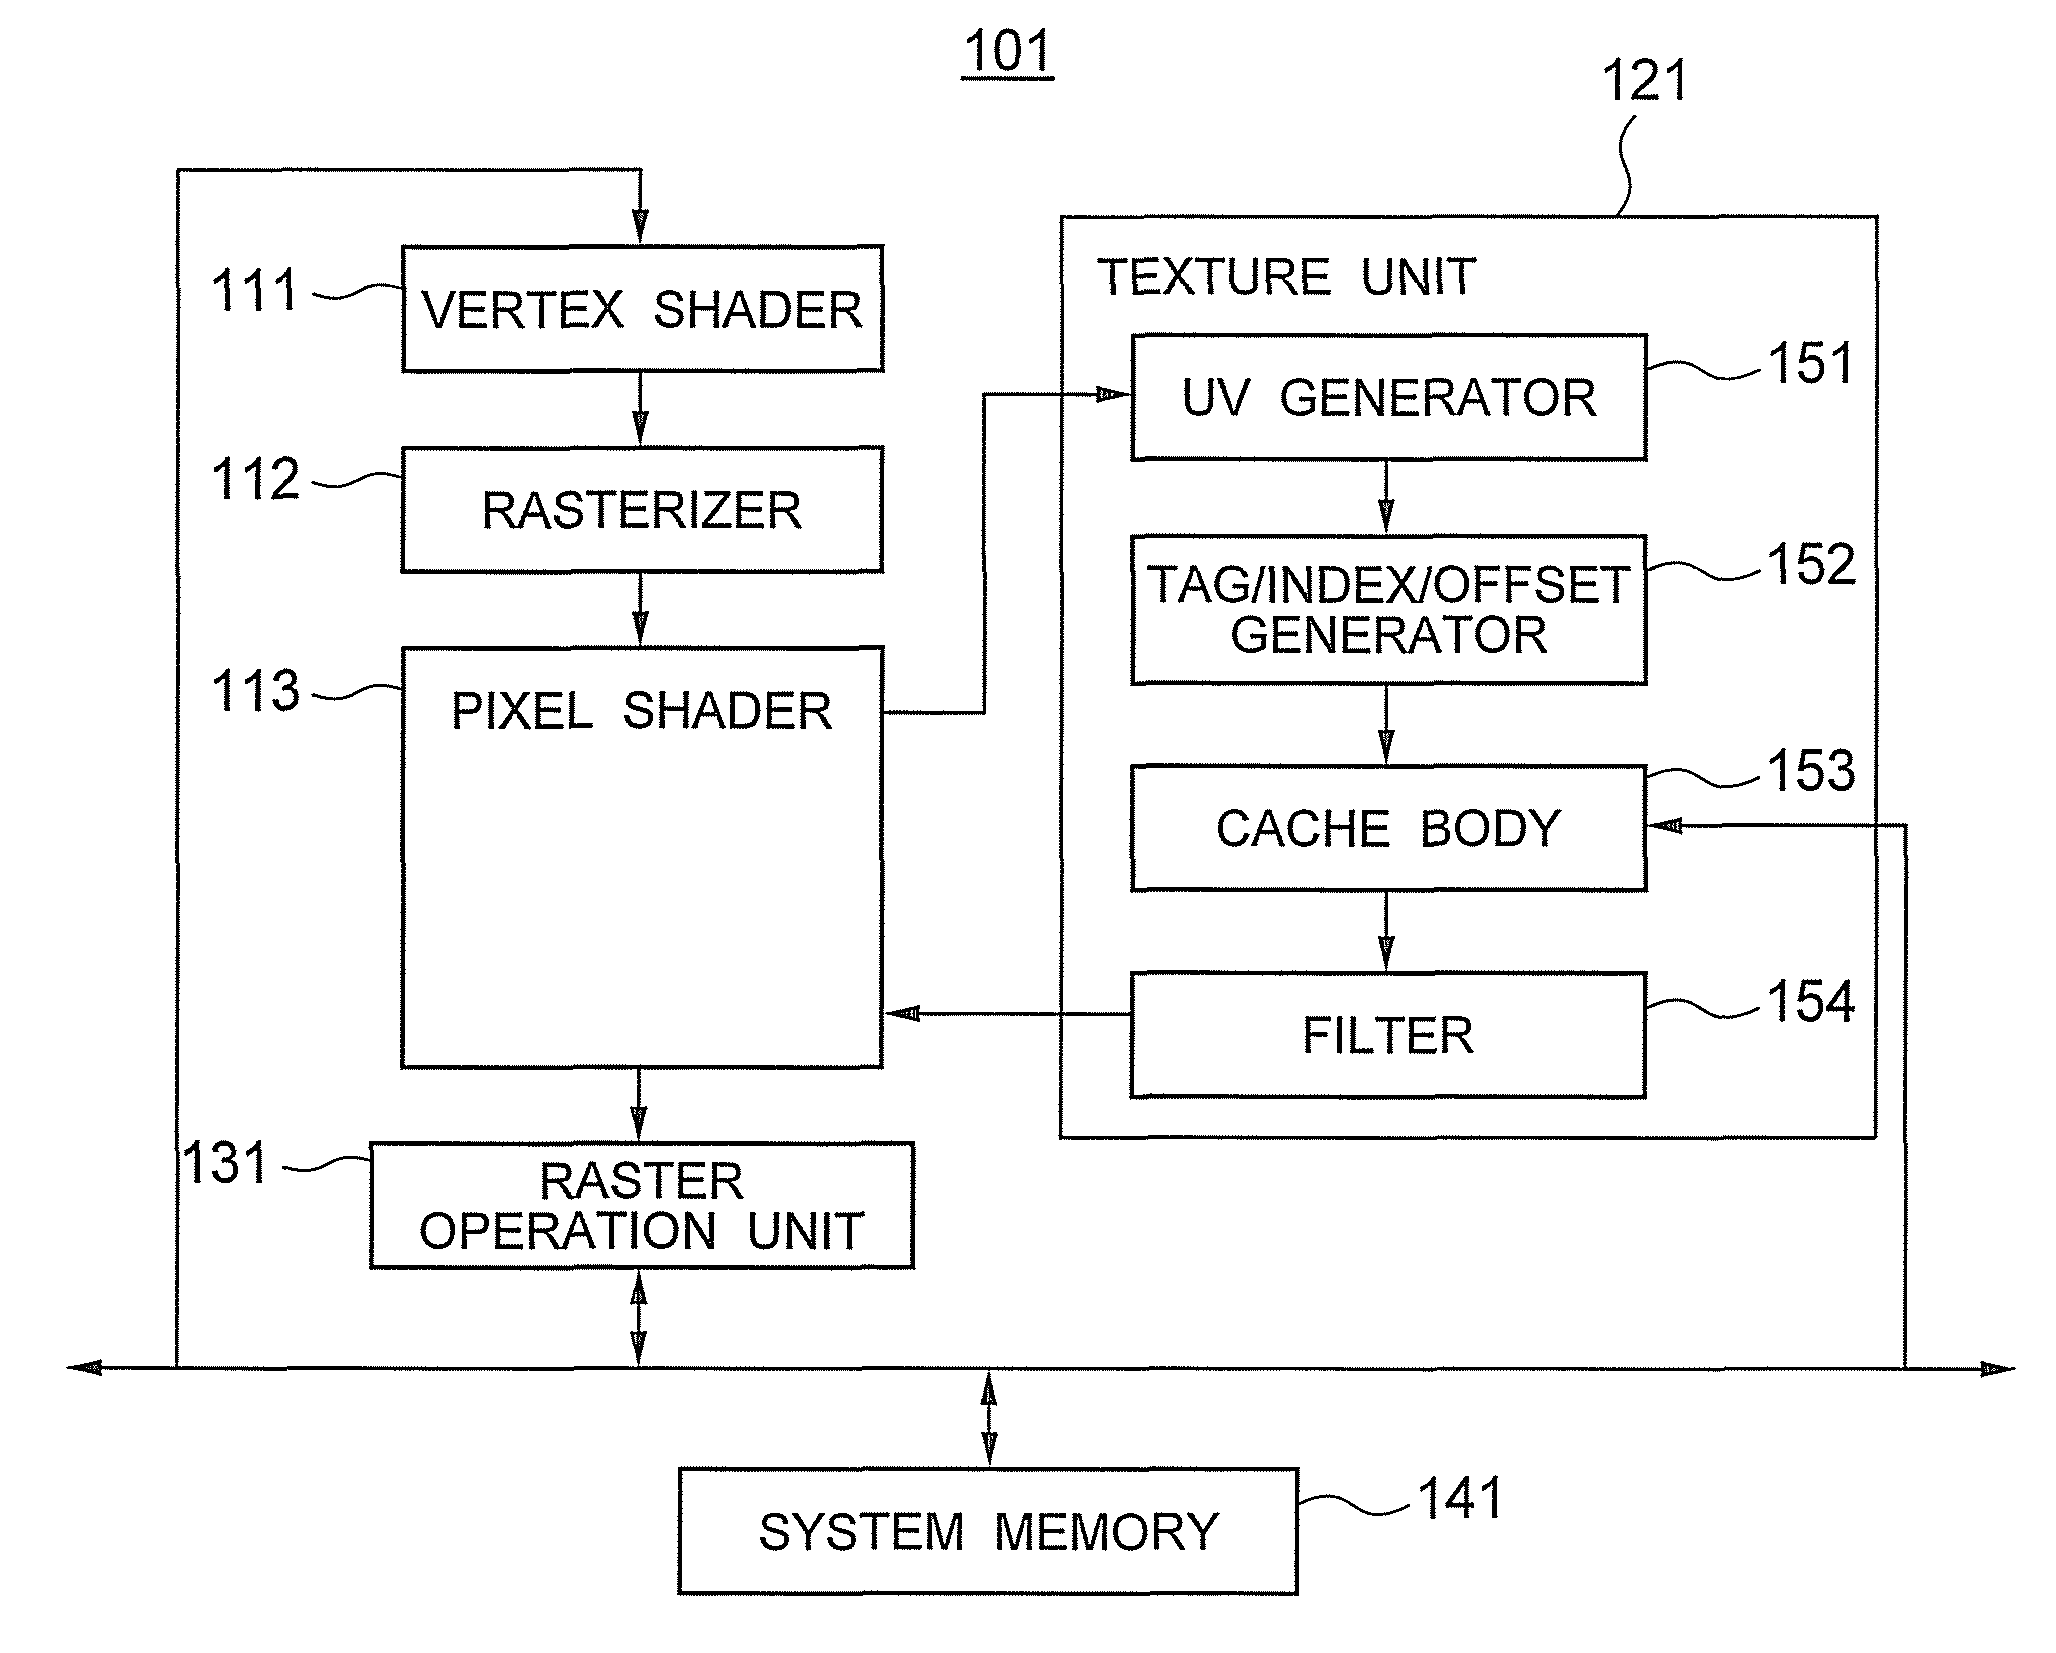 Computer graphics rendering apparatus and method